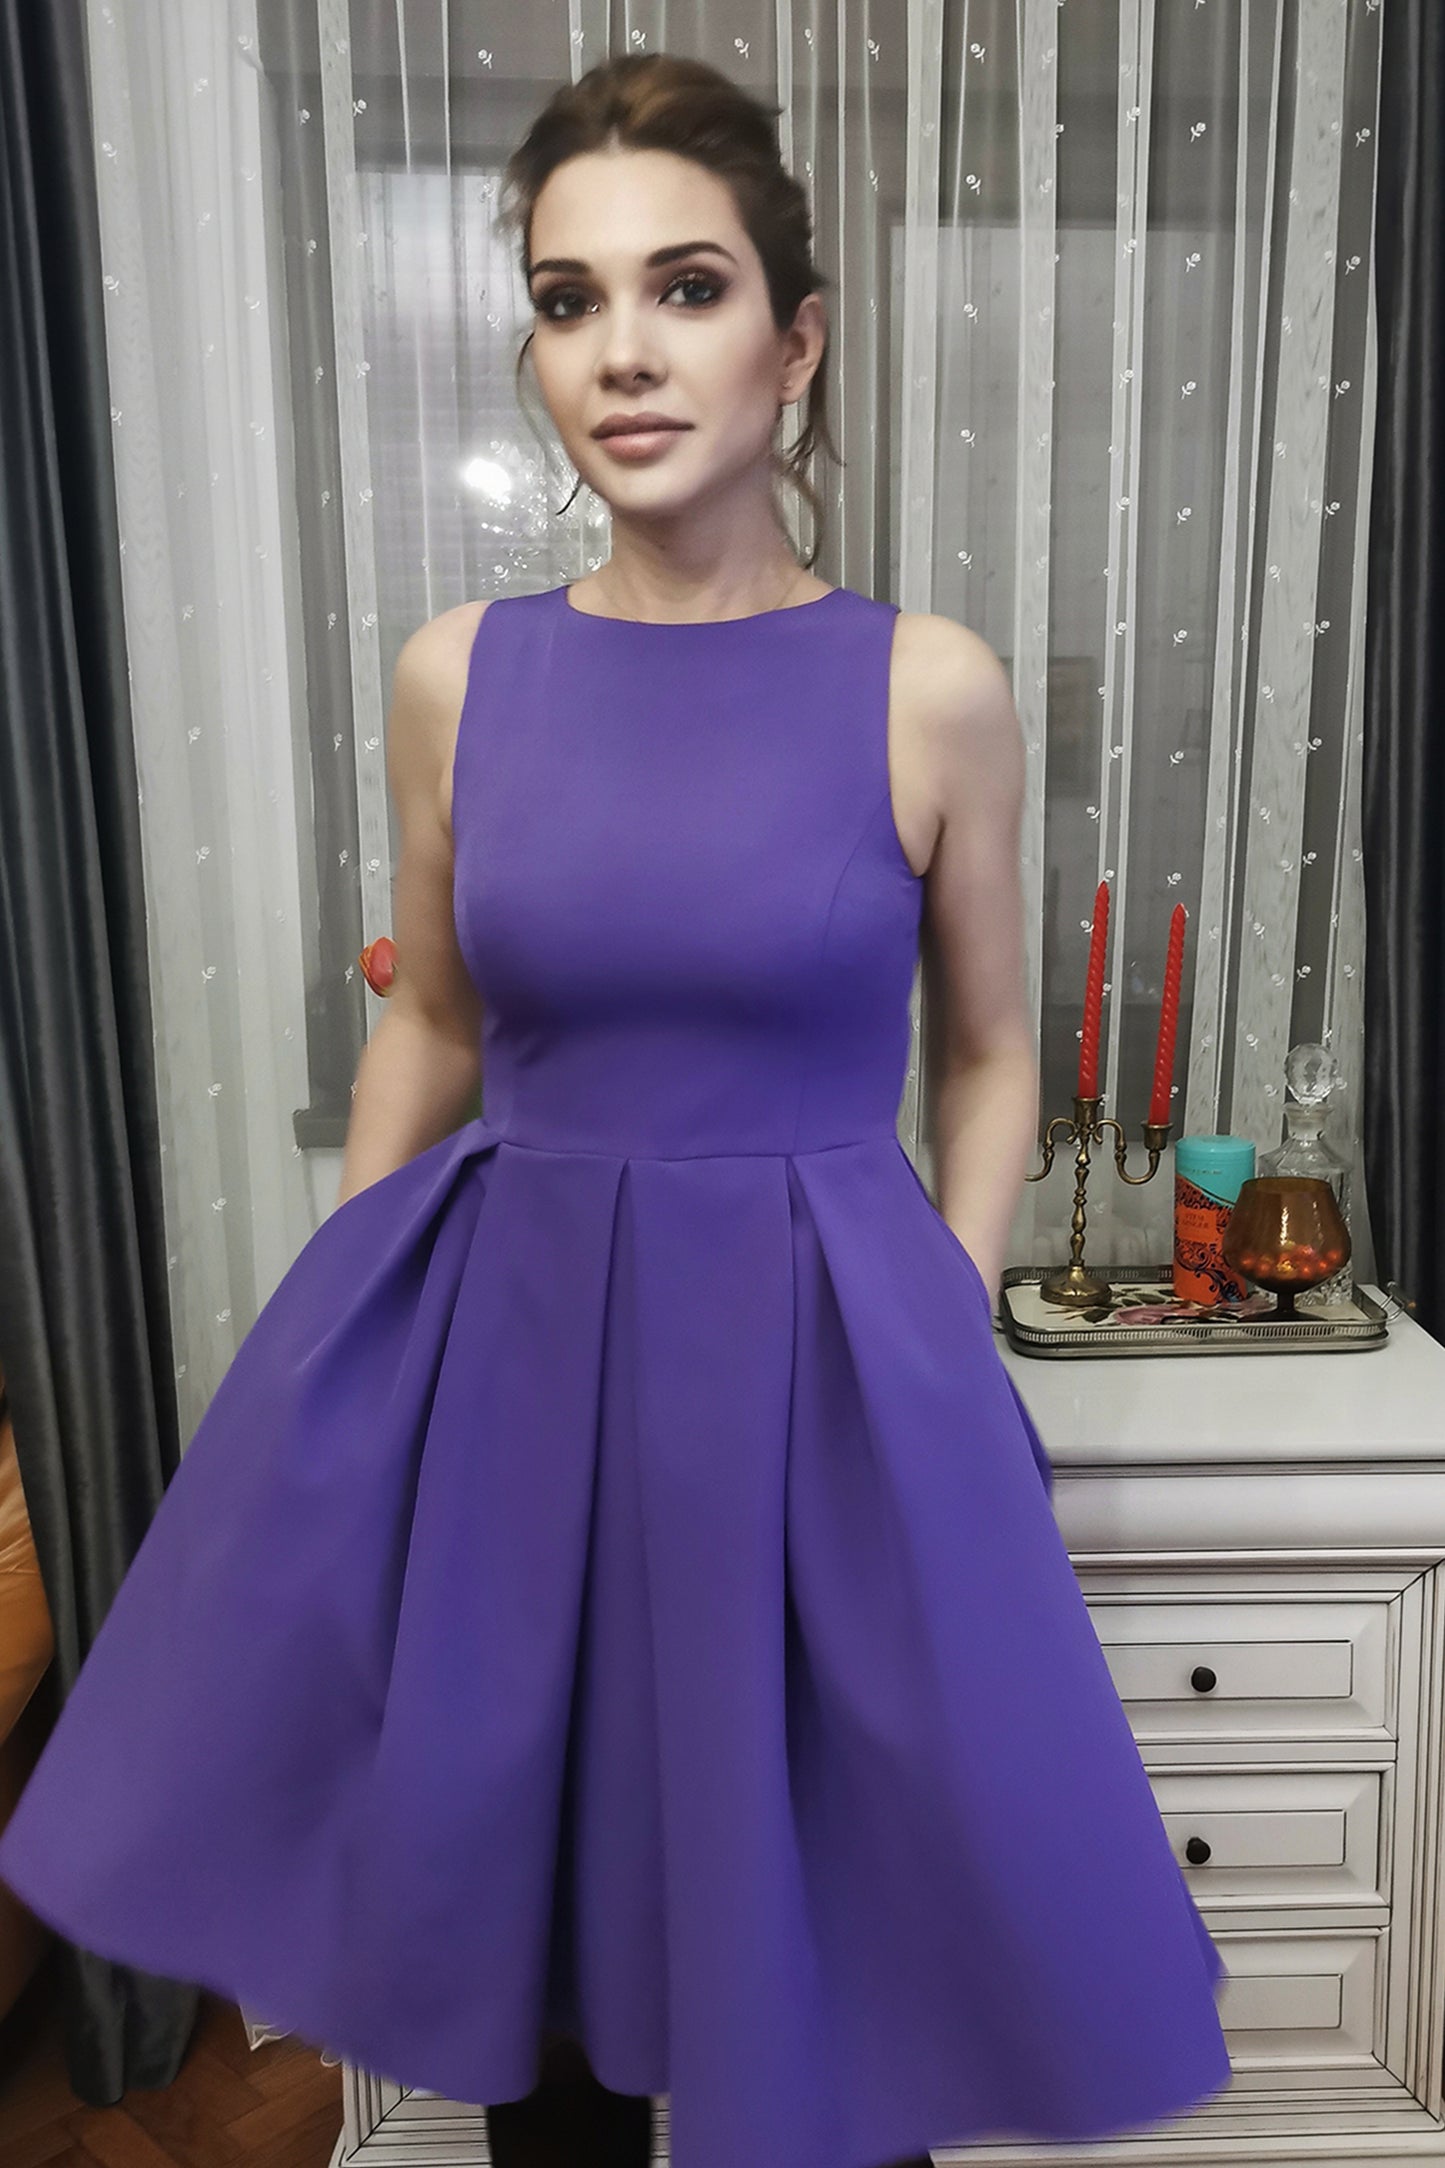 Purple Perfection: Dress with Delightful Details and Handy Pockets